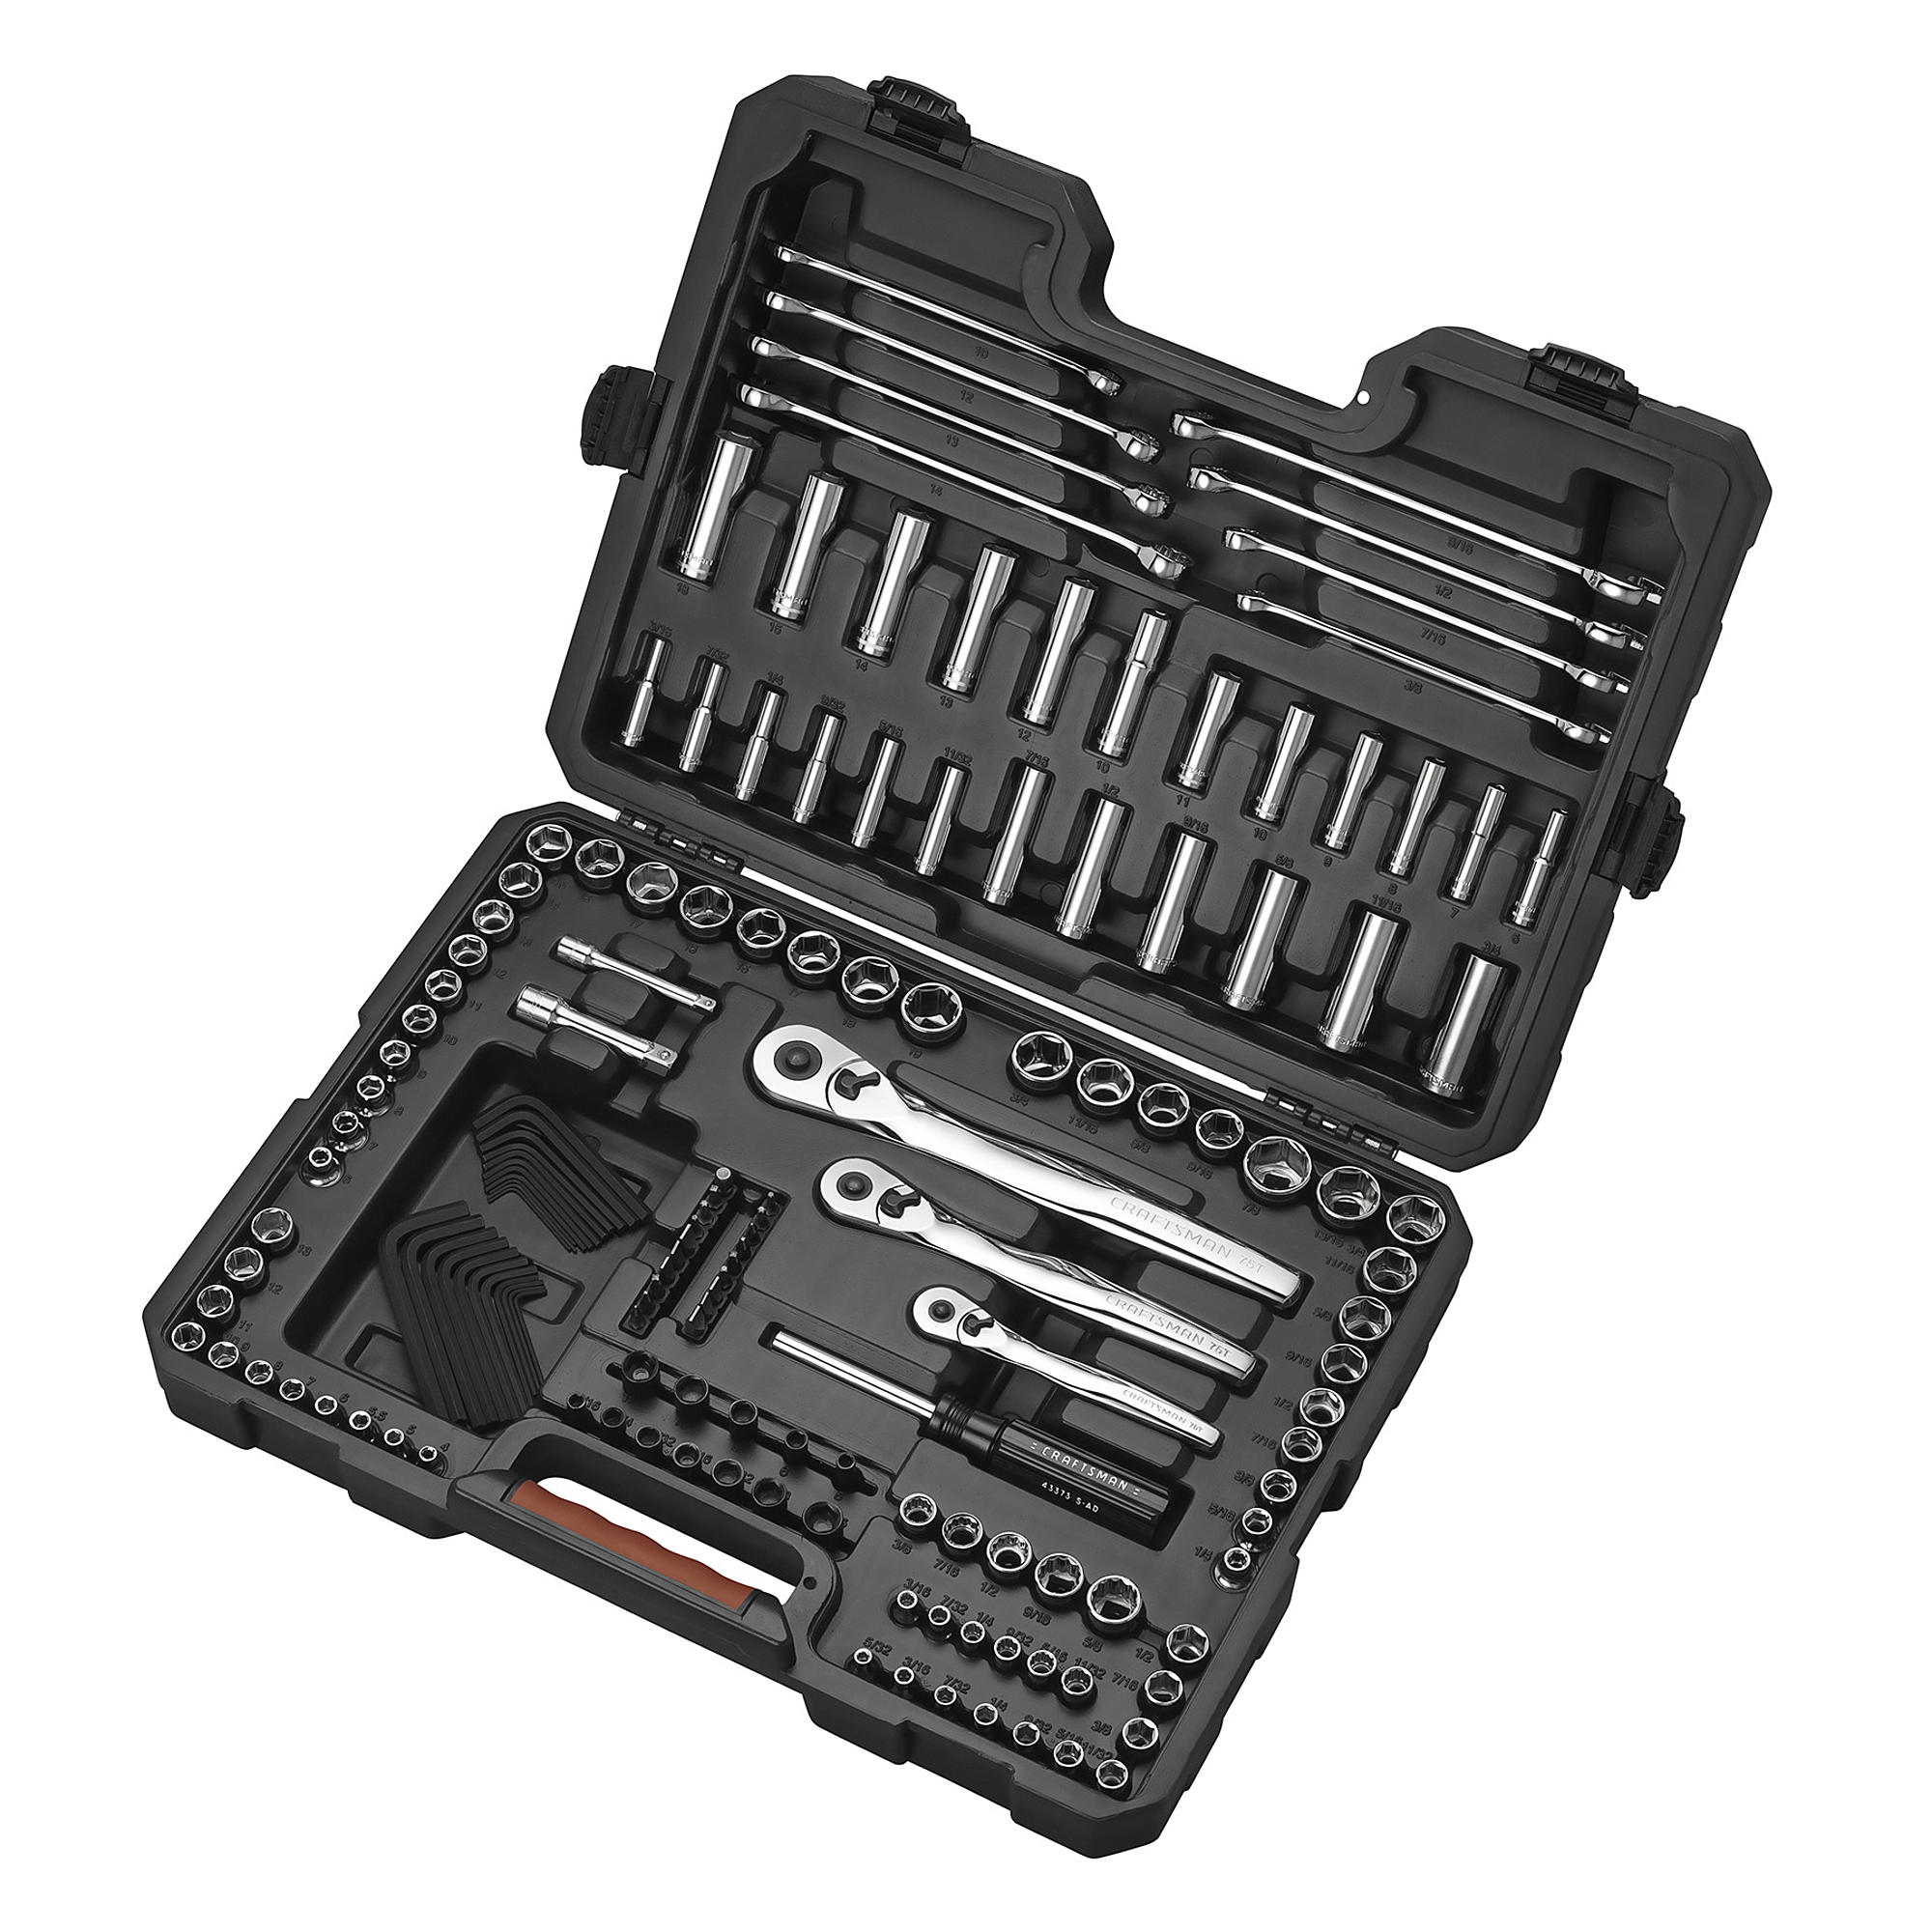 Craftsman 155-piece mechanics tool set with 75 tooth ratchets for $72